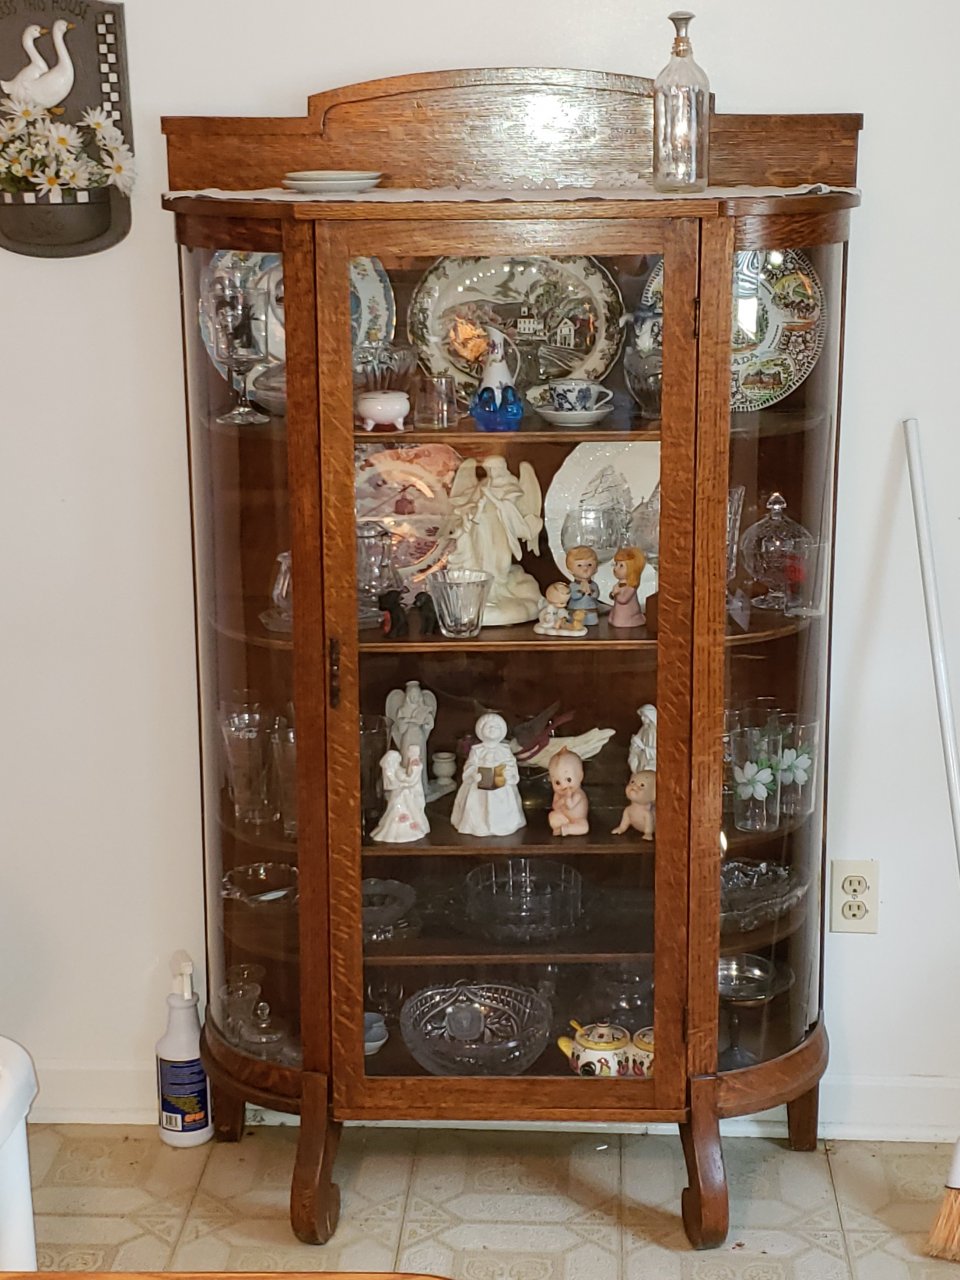 Is This Old Furniture Worth Anything? | My Antique Furniture Collection